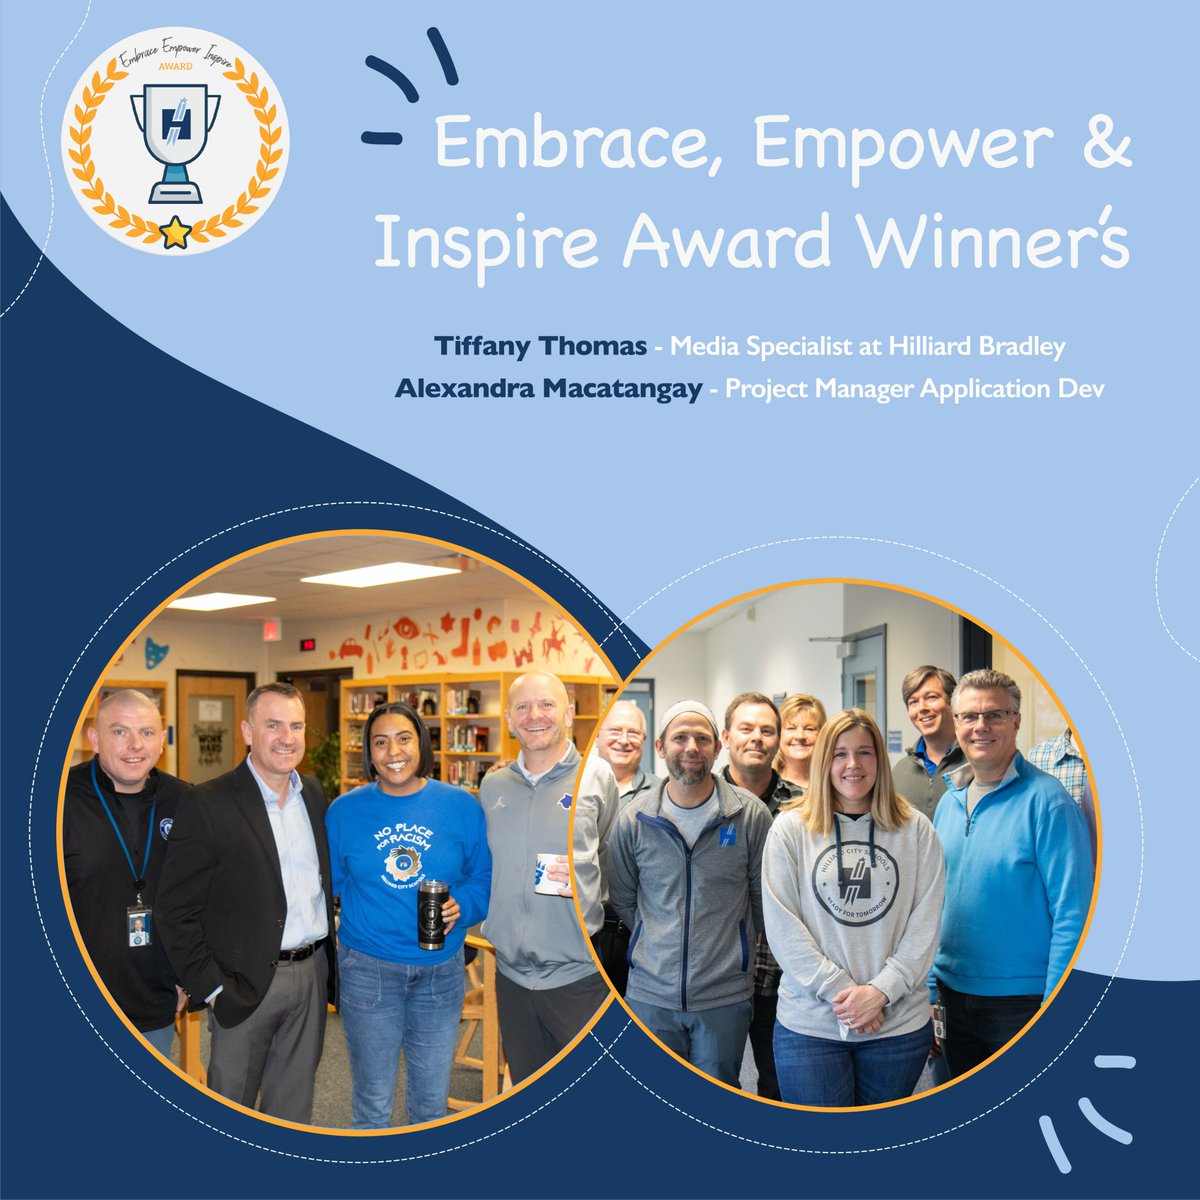 Congrats to these Embrace, Empower & Inspire Award winners, Tiffany Thomas and Alexandra Macatangay If you know a staff member who goes above and beyond, you can nominate them for next month’s award by clicking the link below: docs.google.com/forms/d/e/1FAI…